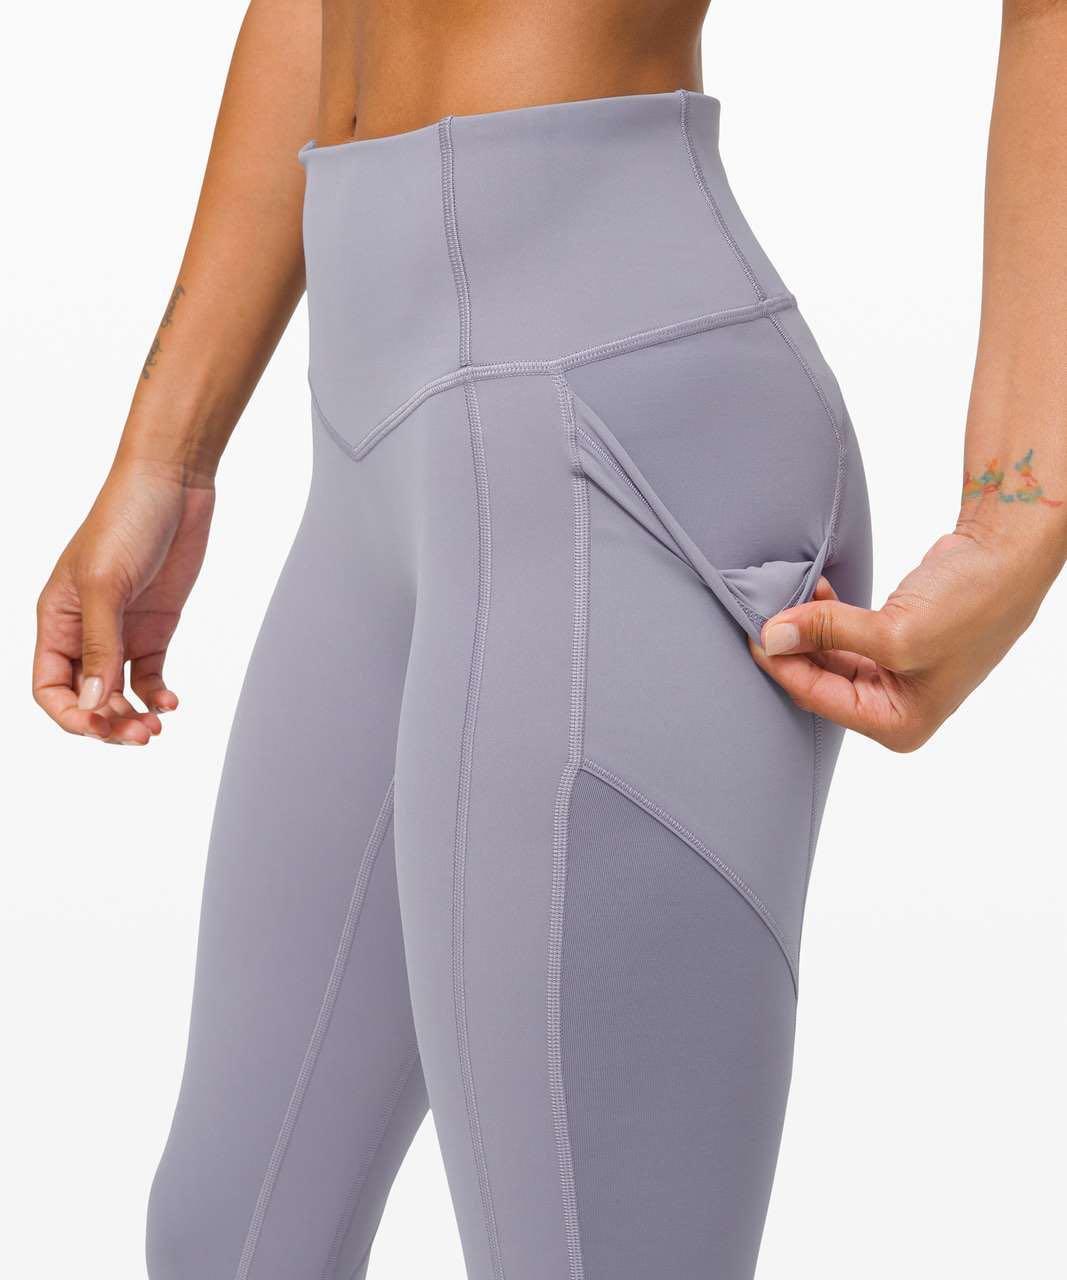 https://media.karousell.com/media/photos/products/2022/2/11/lululemon_all_the_right_places_1644549380_a12e4c08_progressive.jpg